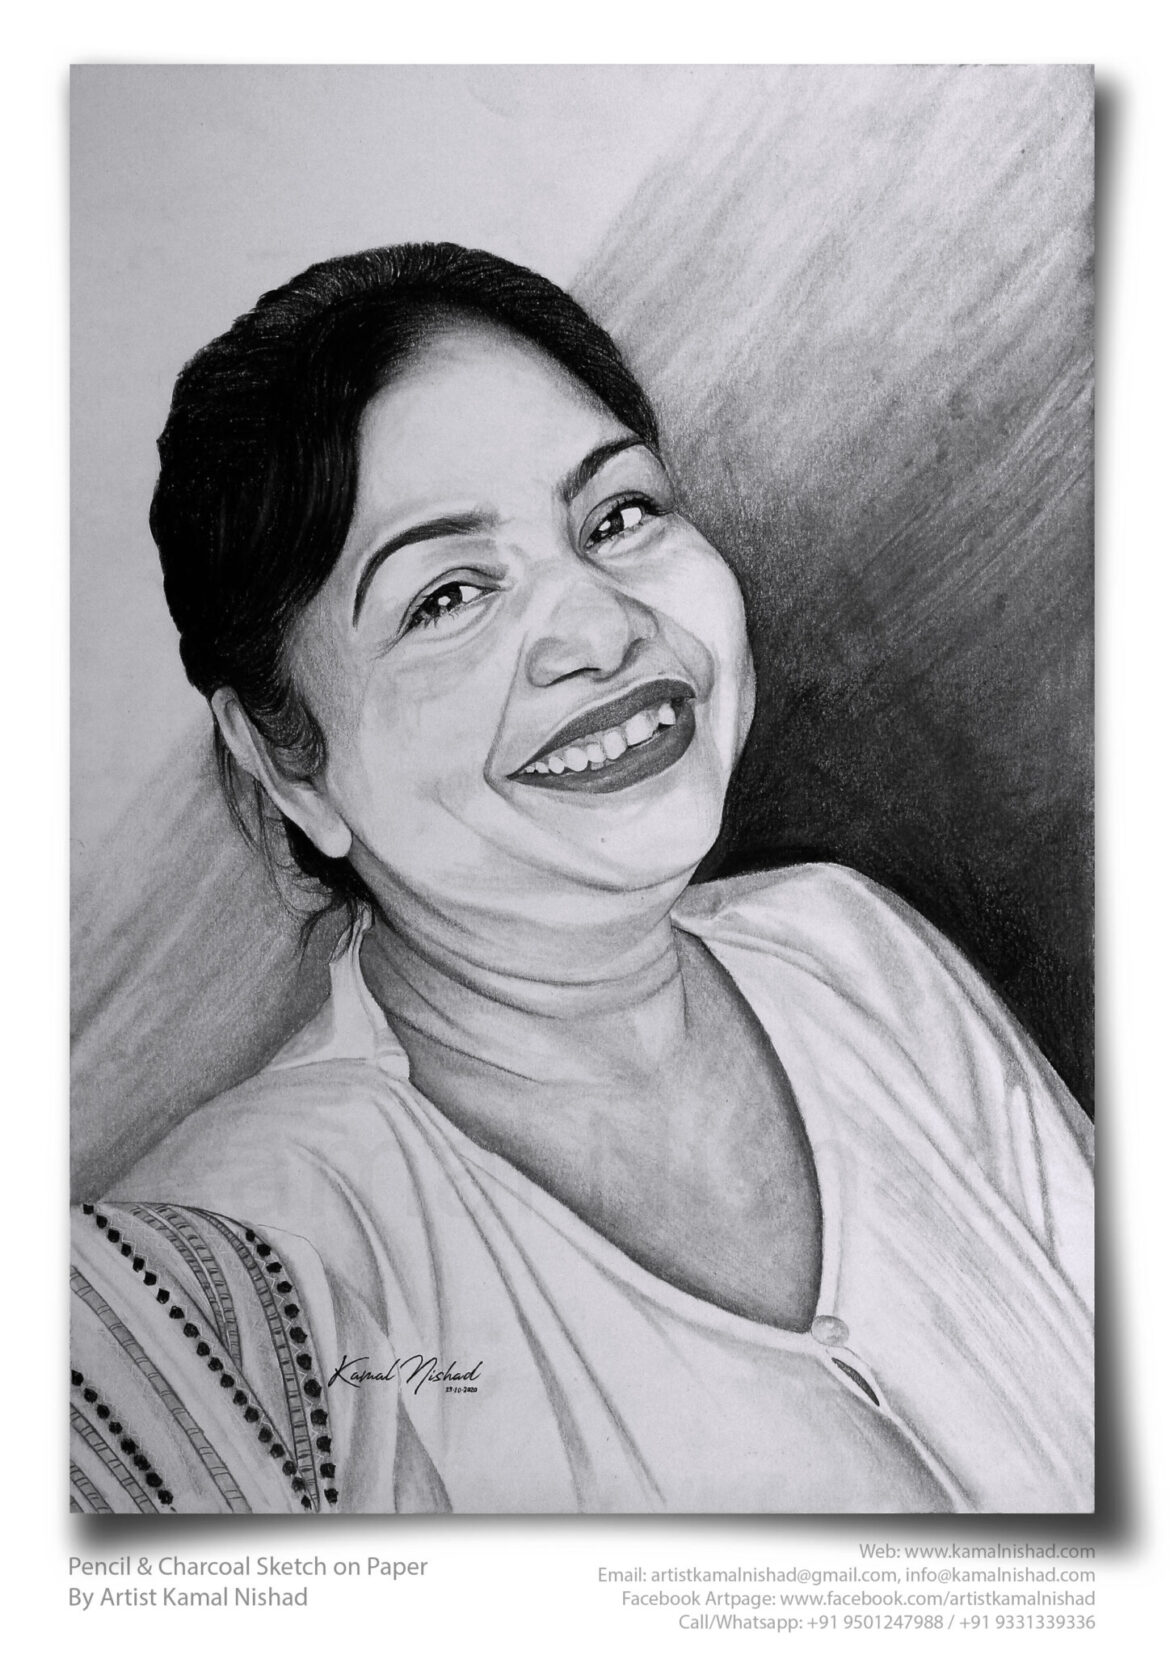 ECSTATIC | Pencil & Charcoal Sketch Title : ECSTATIC Medium : Pencil & Charcoal Sketch Size : A3 Paper size (Sketch size 18.5 x 23.7 cm*) Artist : Kamal Nishad This is a Handmade/hand-drawn Sketch made with Pencil & Charcoal “ECSTATIC”. This is a Birthday Gift from One of my Client/Friend to her Mom. “HAPPY BIRTHDAY 🎈🎁 🎂 💐” SIZE: Paper size A3 (work area 11.7 x 16.5 inches *estimated) Created by © Kamal Nishad. All rights reserved.